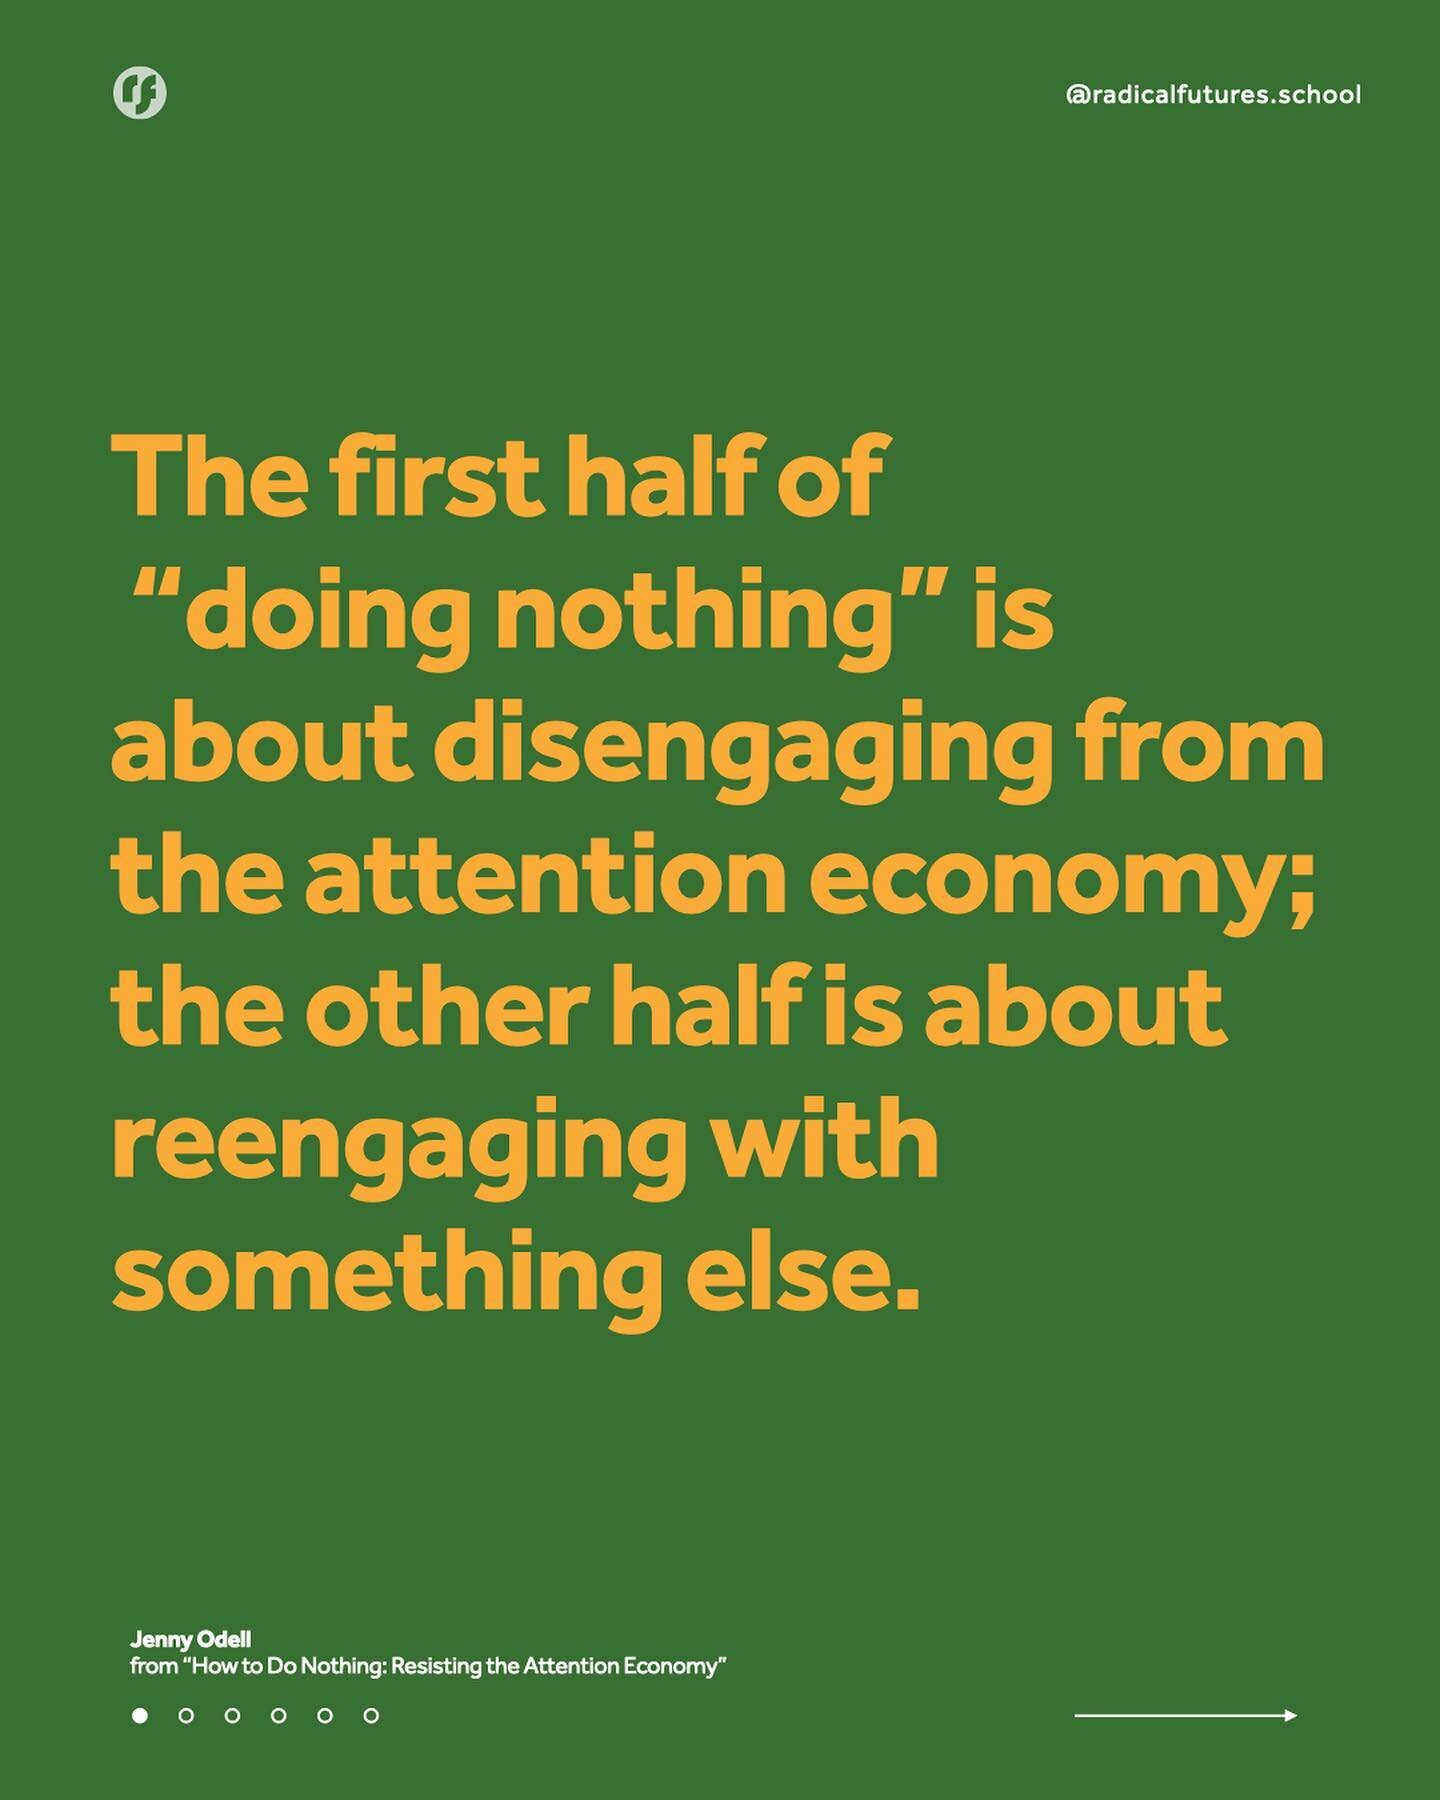 Jenny Odell, Artist and Author of &ldquo;How to Do Nothing: Resisting the Attention Economy&rdquo;